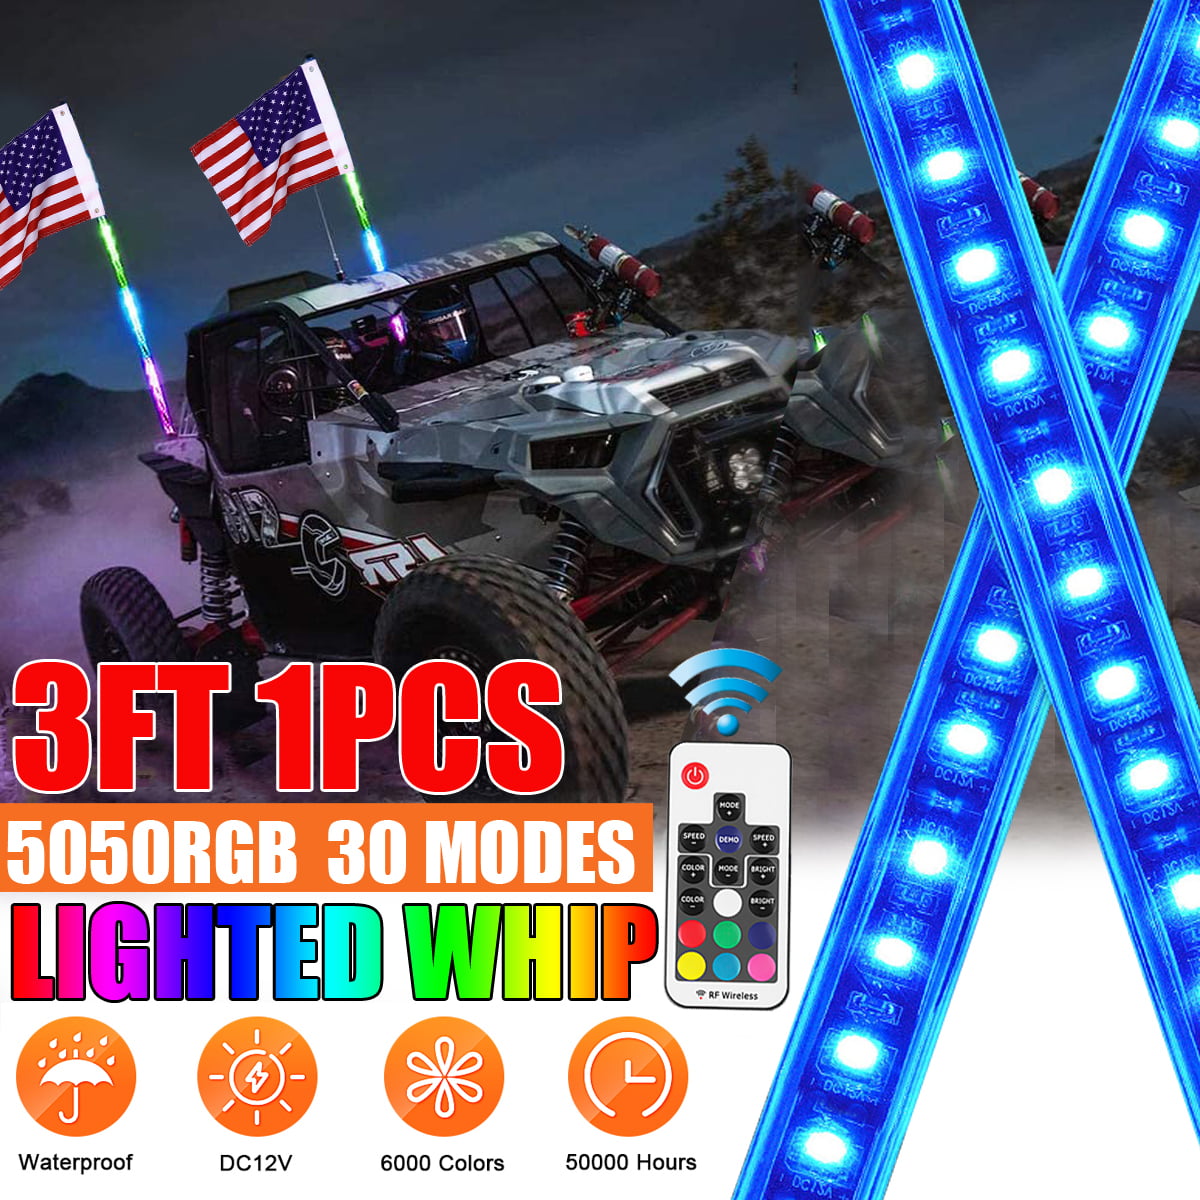 Lighting Modes Spiral RGB Chasing Lighted Whips Antenna Compatible with Can-Am RZR Polaris UTV ATV Accessories 5ft Kemimoto LED Whip Lights for UTV ATV with Bluetooth and USA Flag Pole,366 